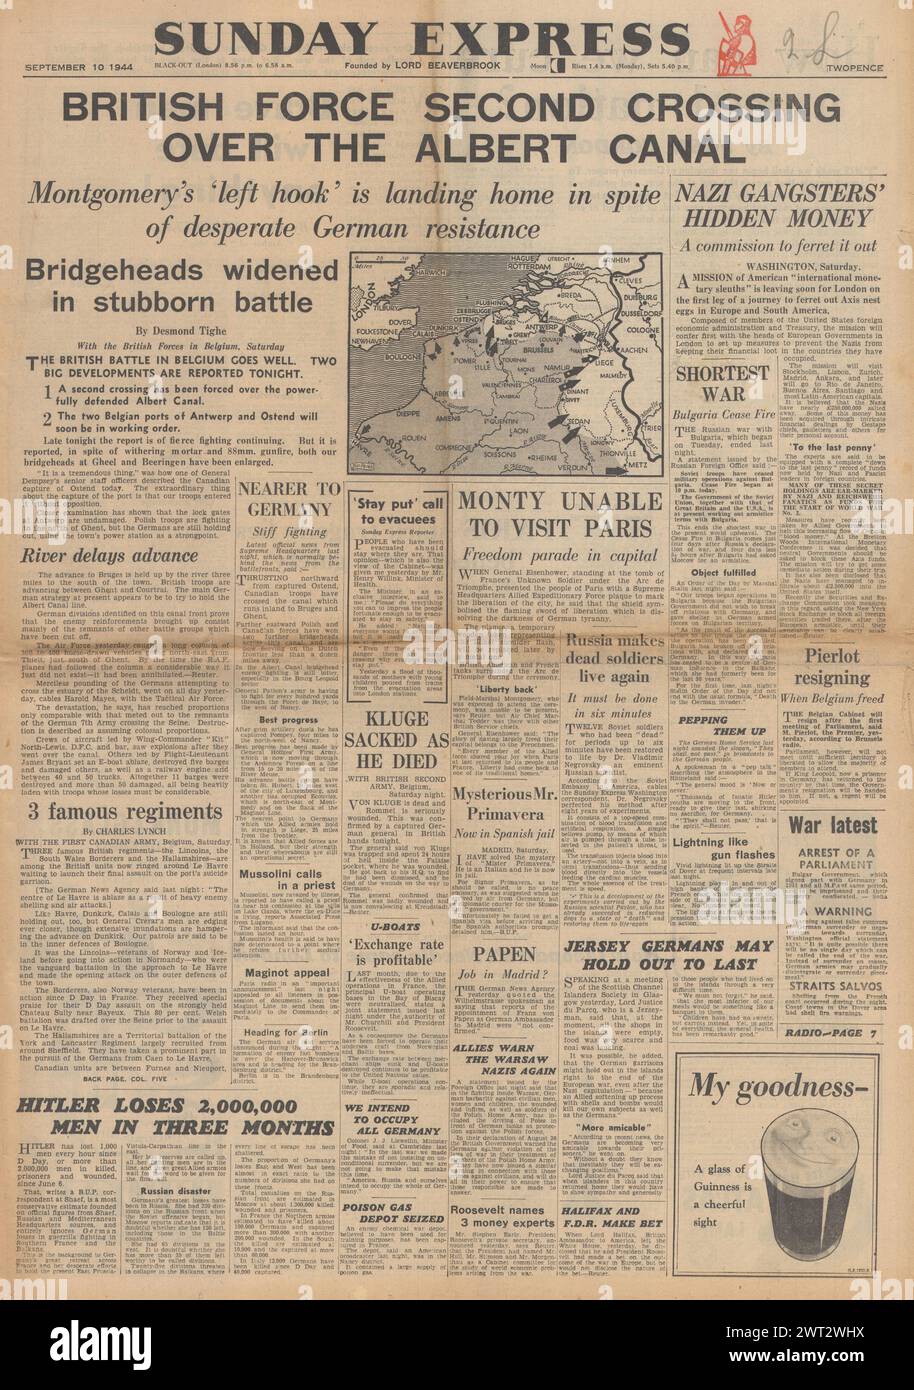 1944 Sunday Express front page reporting British forces cross Albert Canal Stock Photo